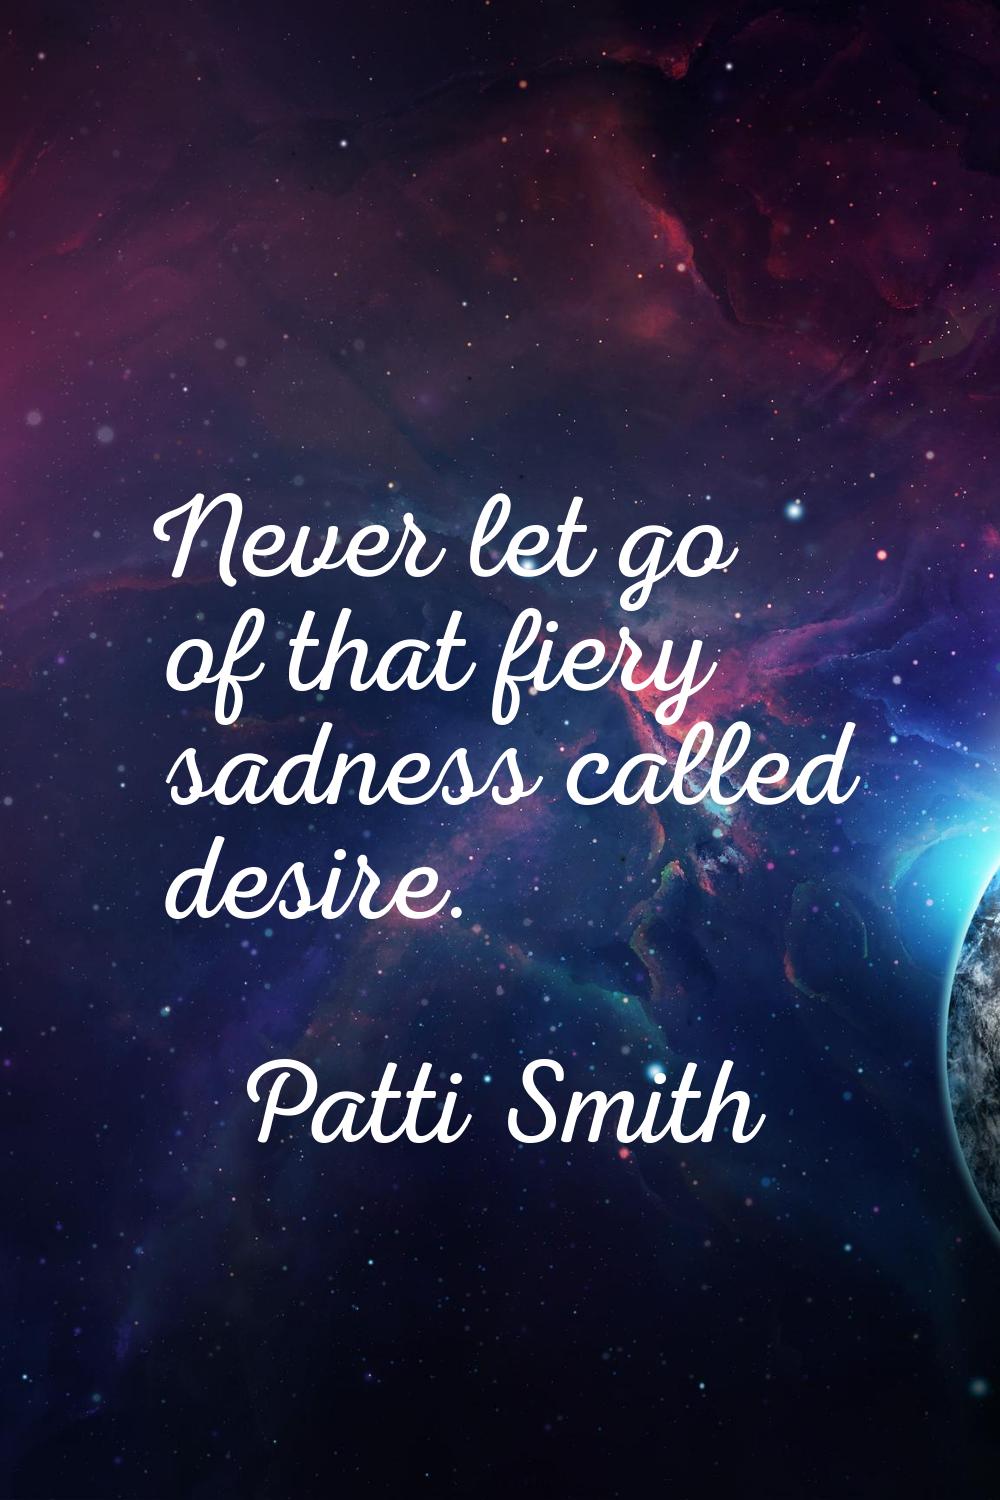 Never let go of that fiery sadness called desire.